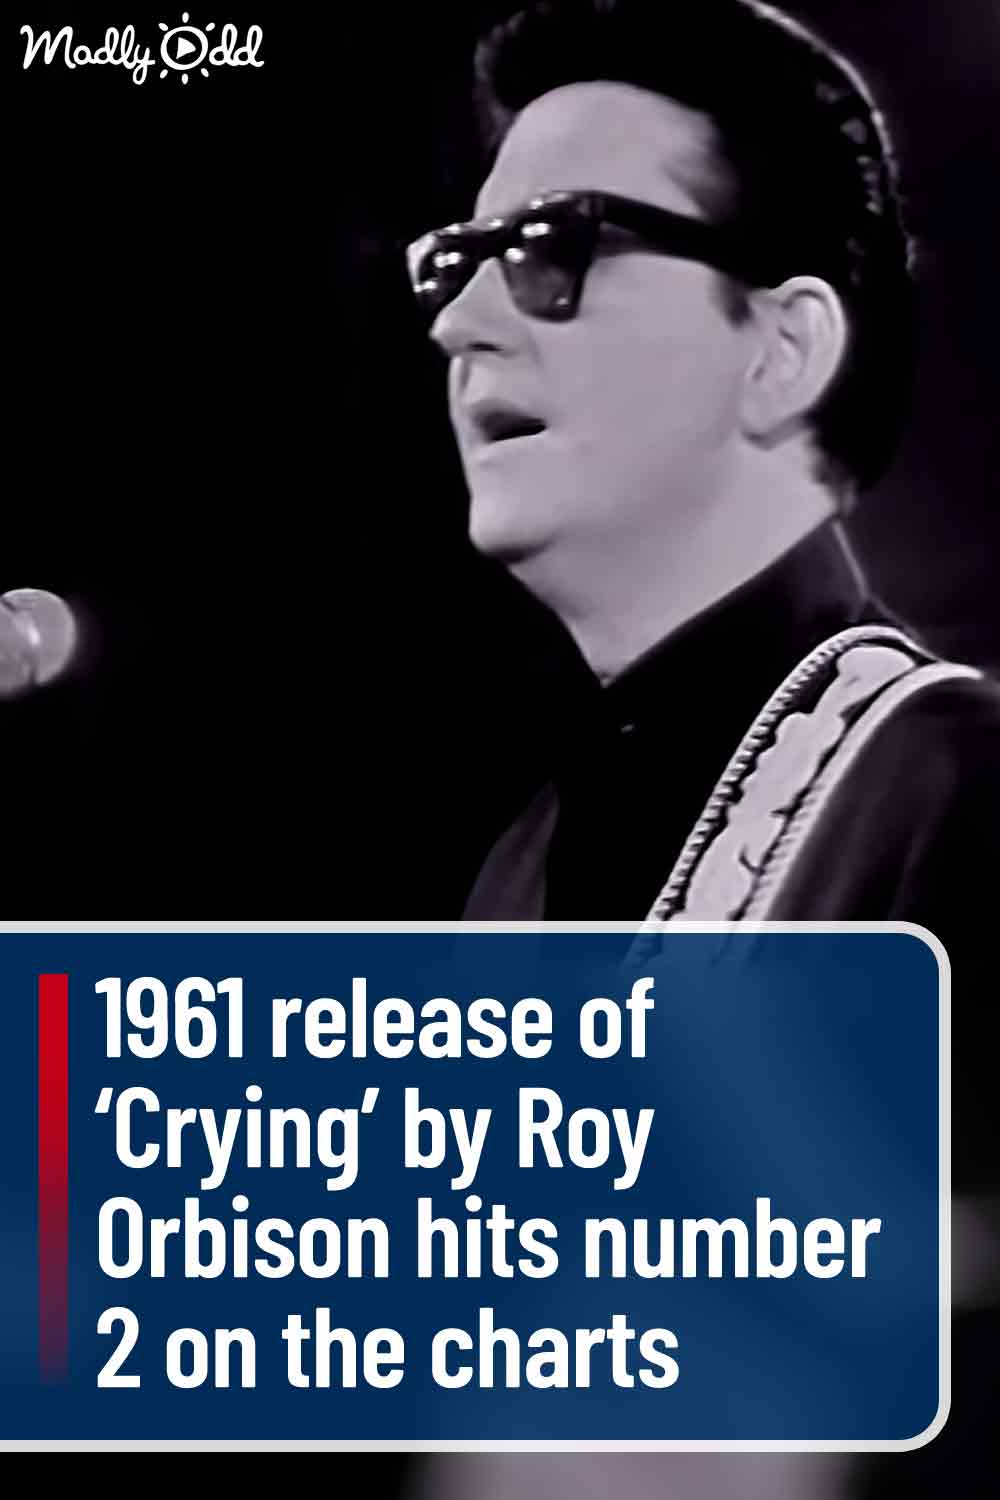 1961 release of ‘Crying’ by Roy Orbison hits number 2 on the charts